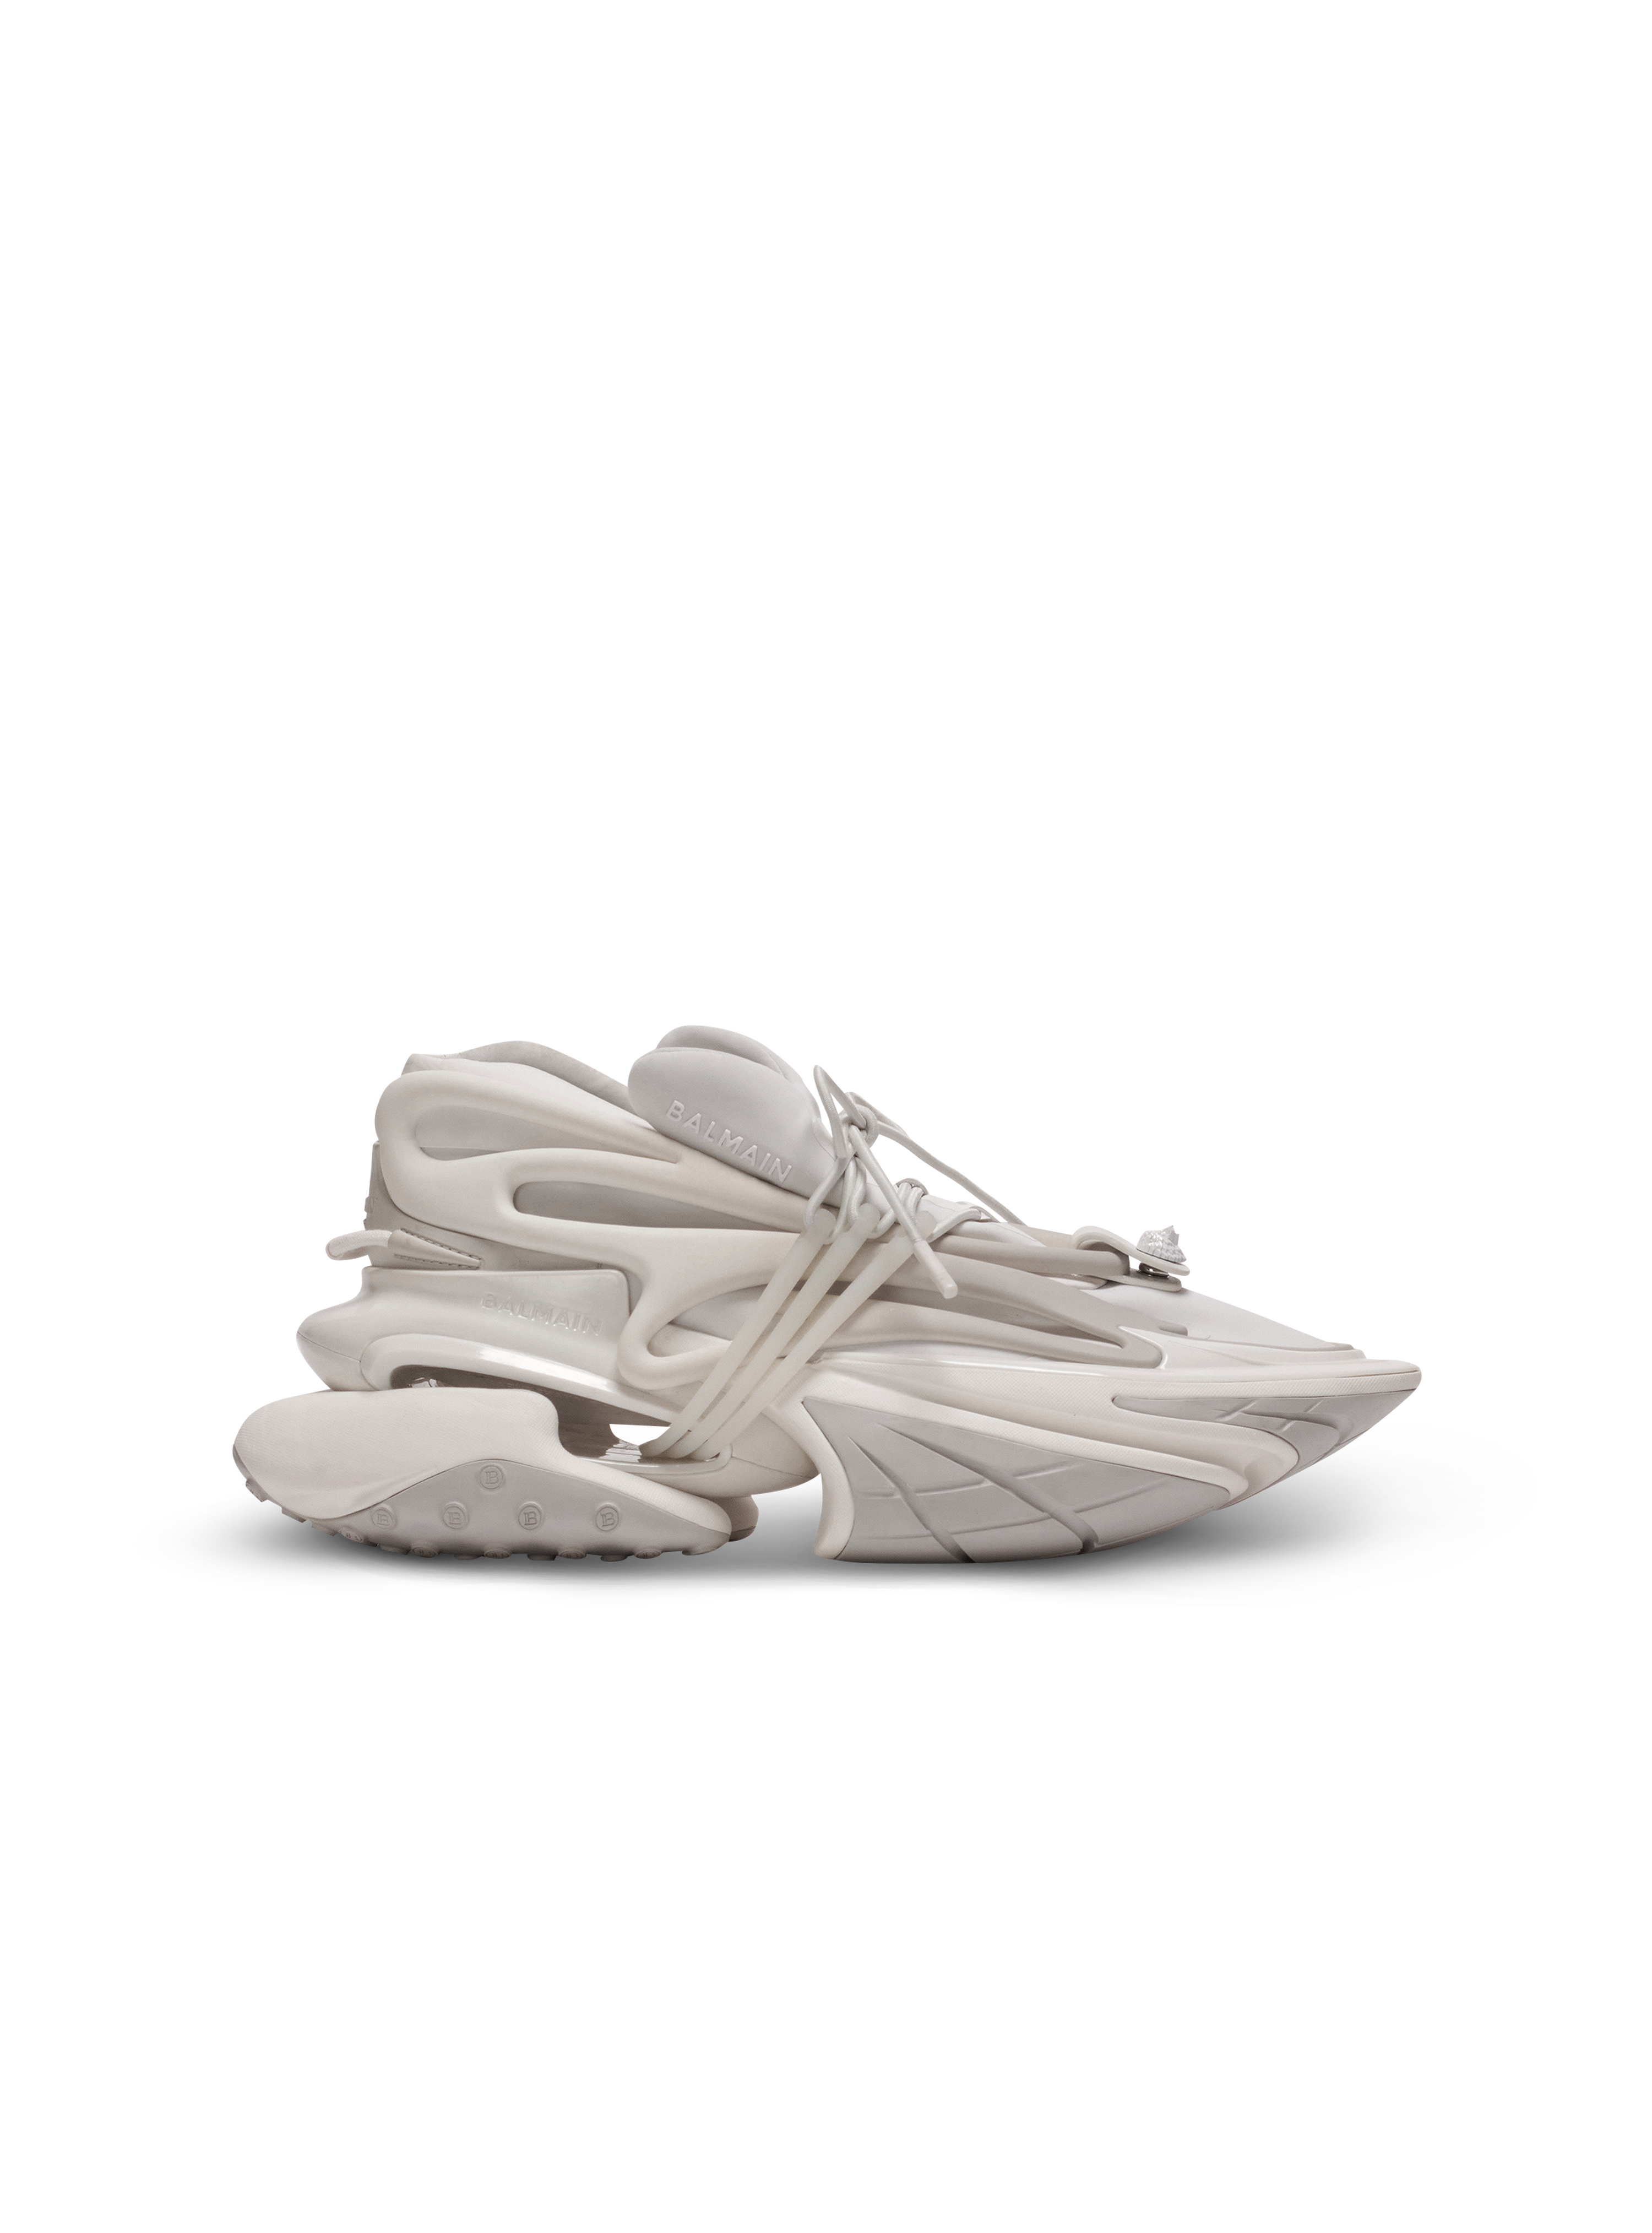 Neoprene and leather Unicorn low-top sneakers, white